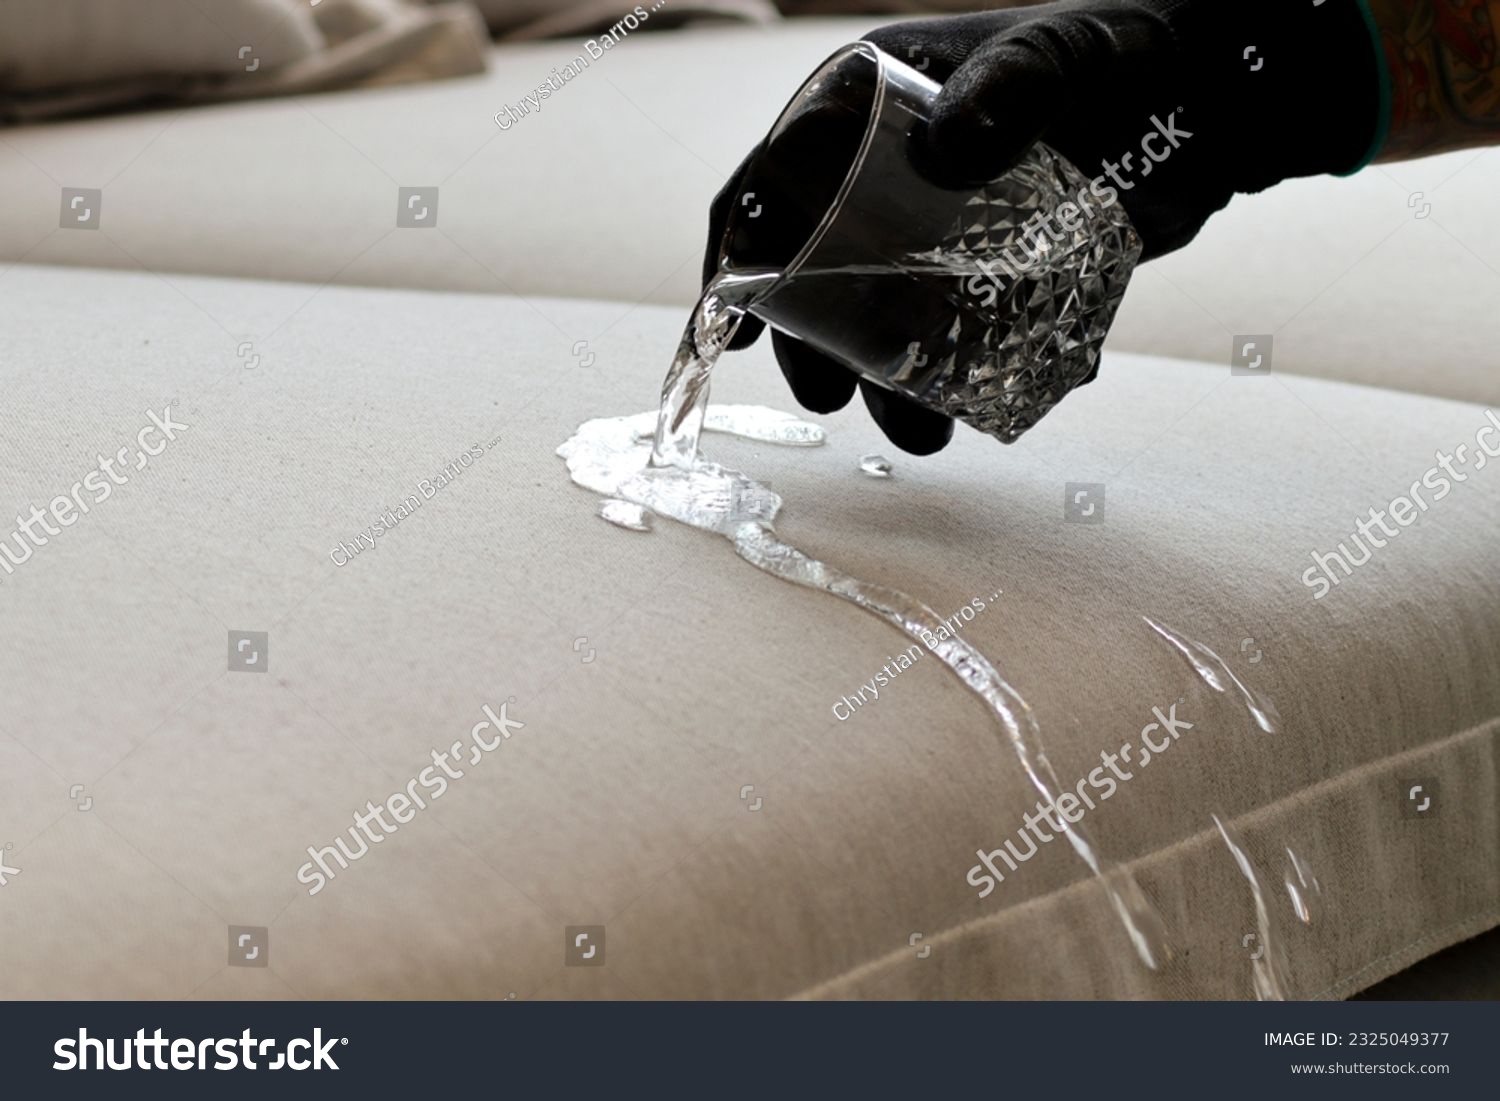 Drops of water on waterproof textile material - Waterproof fabric on upholstery #2325049377